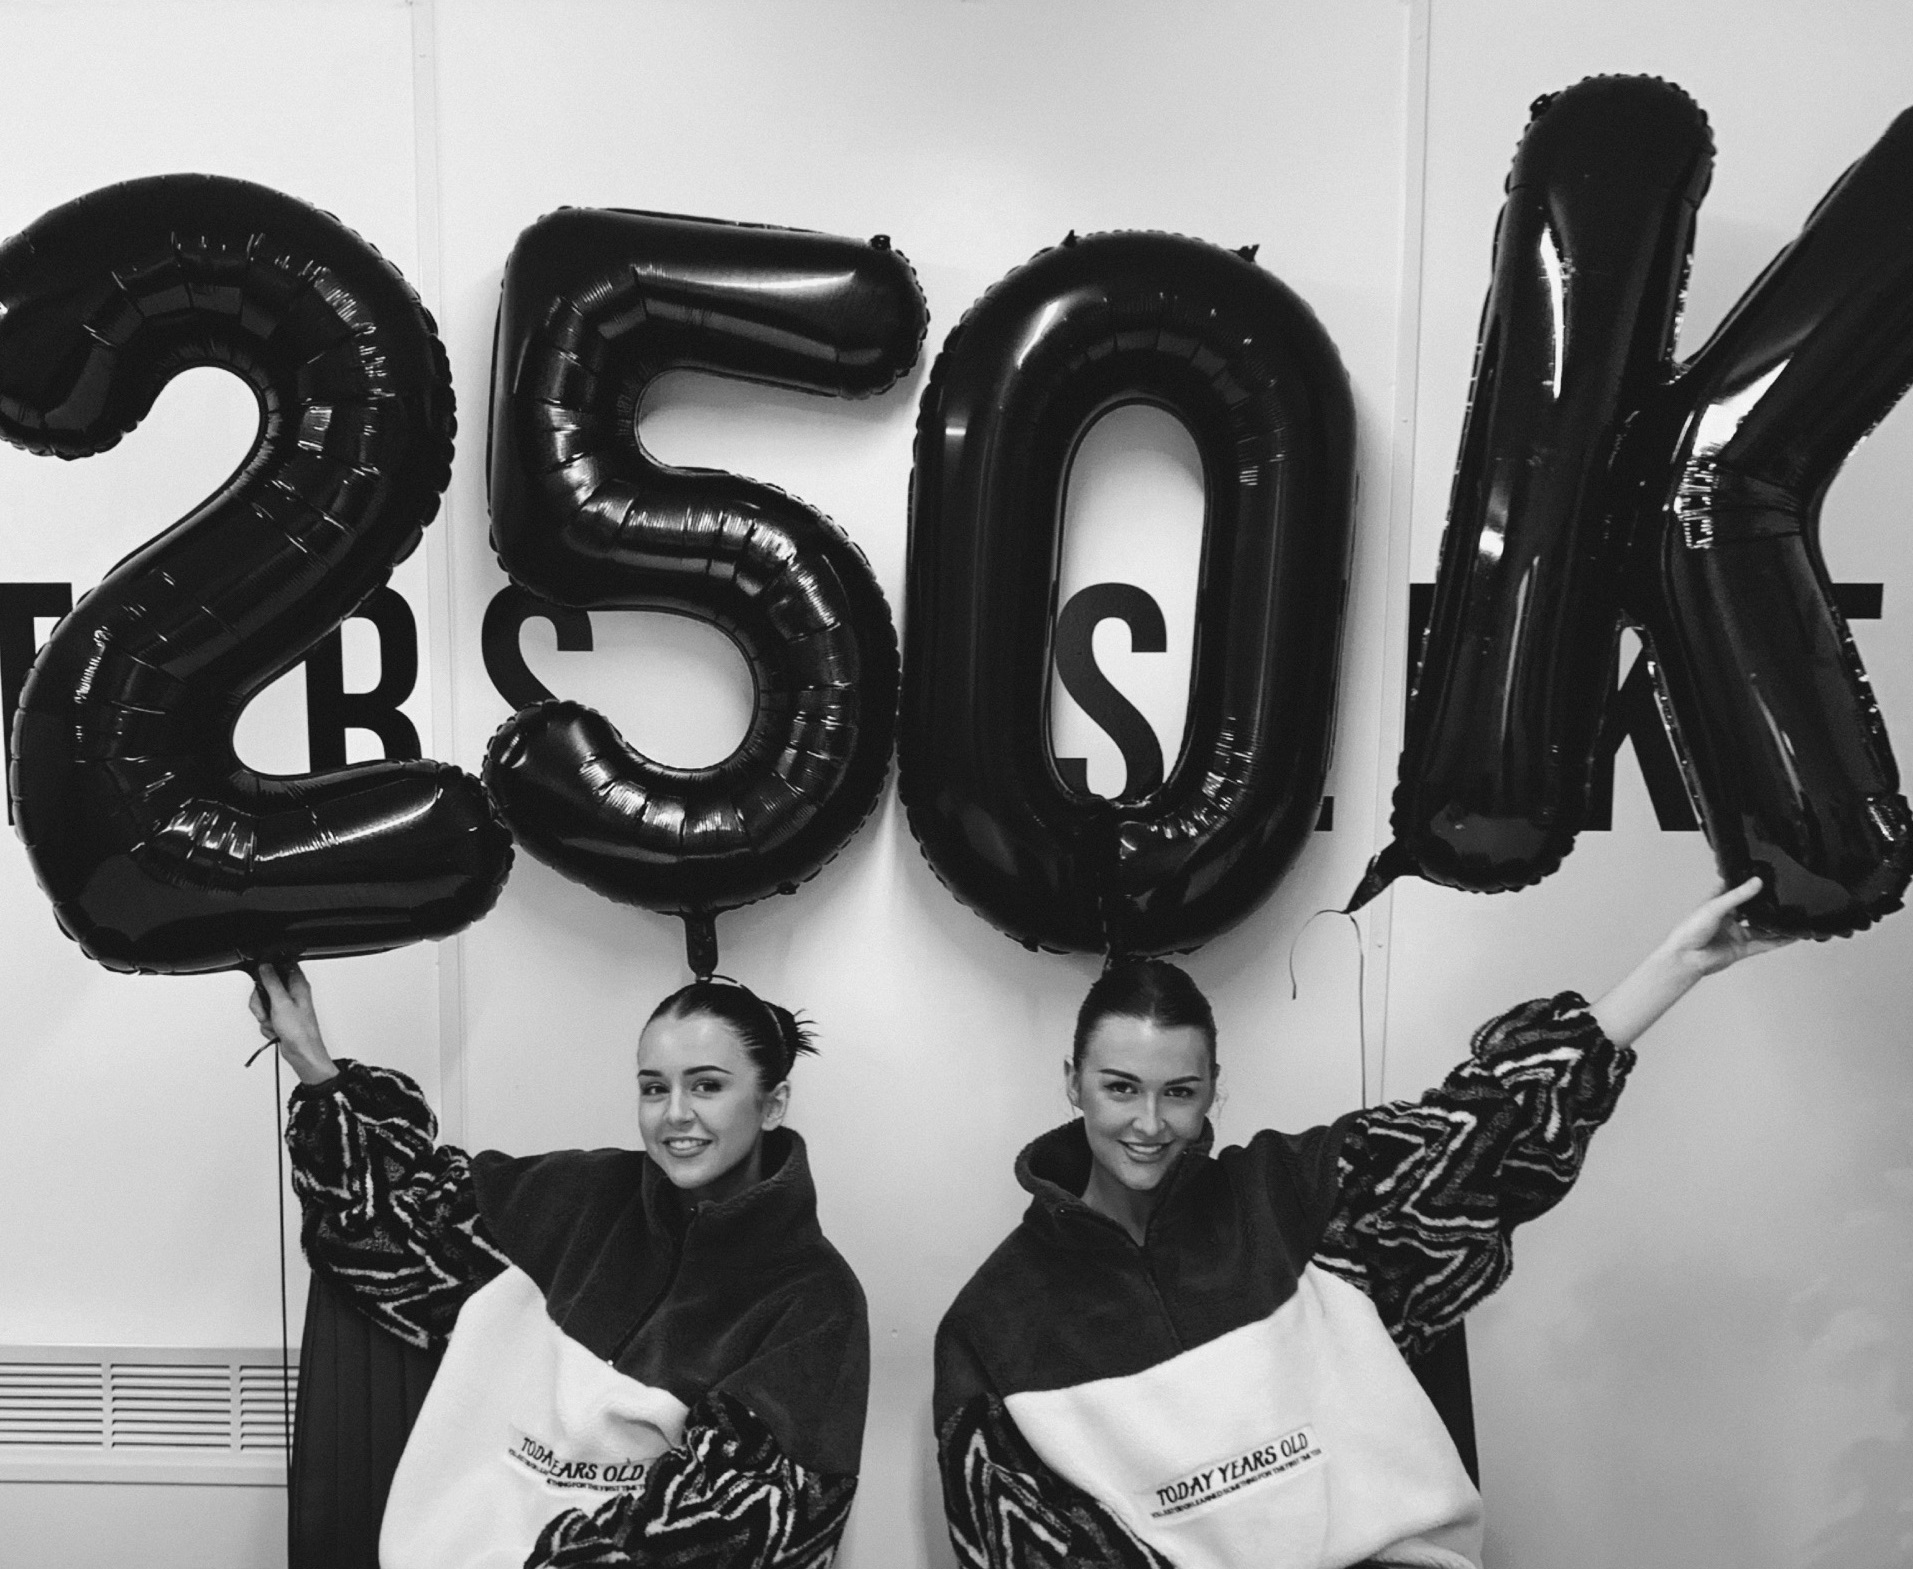 Alice and Maisie Jones celebrating reaching 250,000 followers on Instagram in February 2021.